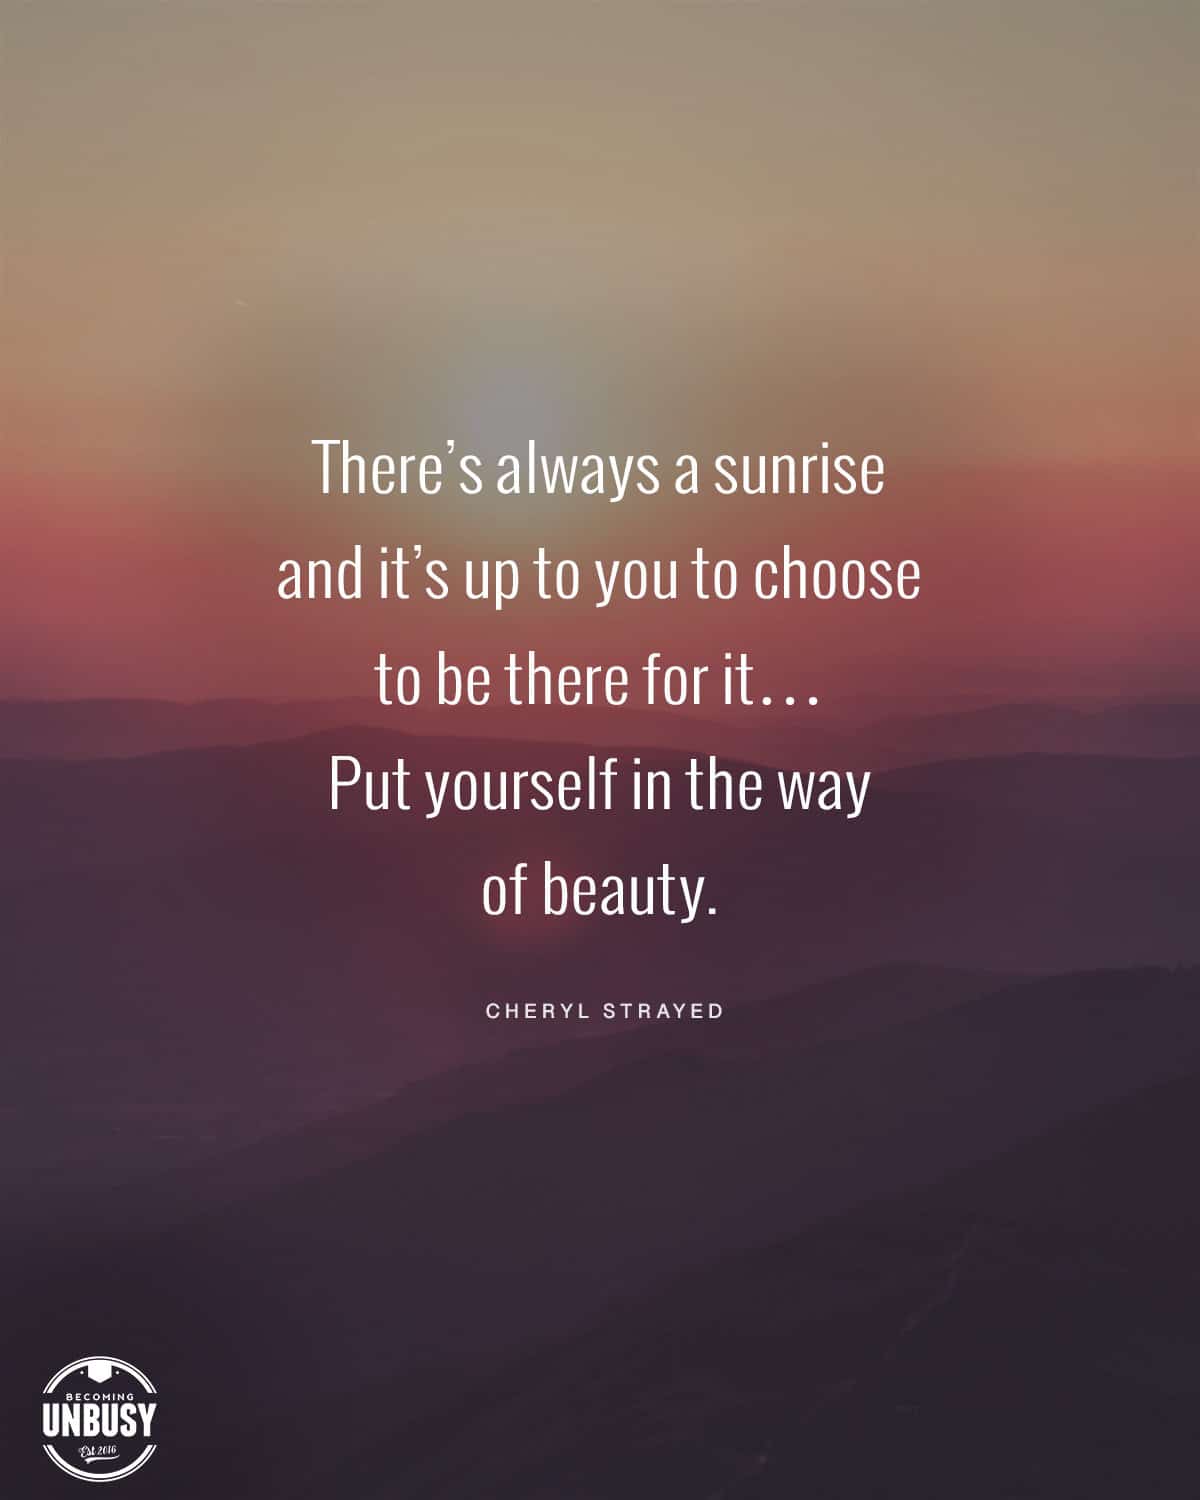 The following winter self-care reminder over a photo a mountain sunrise, "There's always a sunrise and it's up to you to choose to be there for it. Put yourself in the way of beauty."